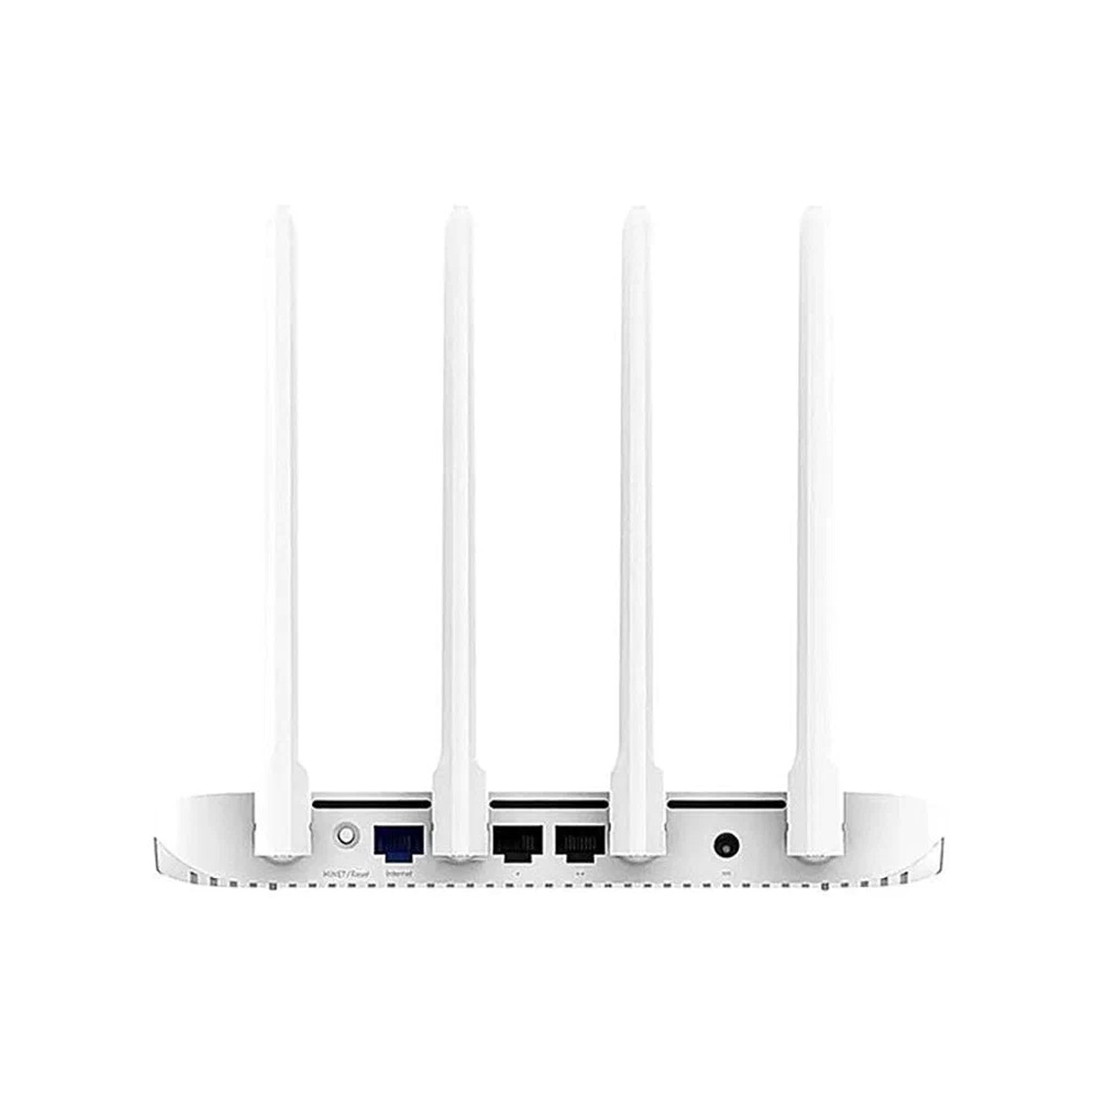 Маршрутизатор Xiaomi Router AC1200 - фото 3 - id-p108631779